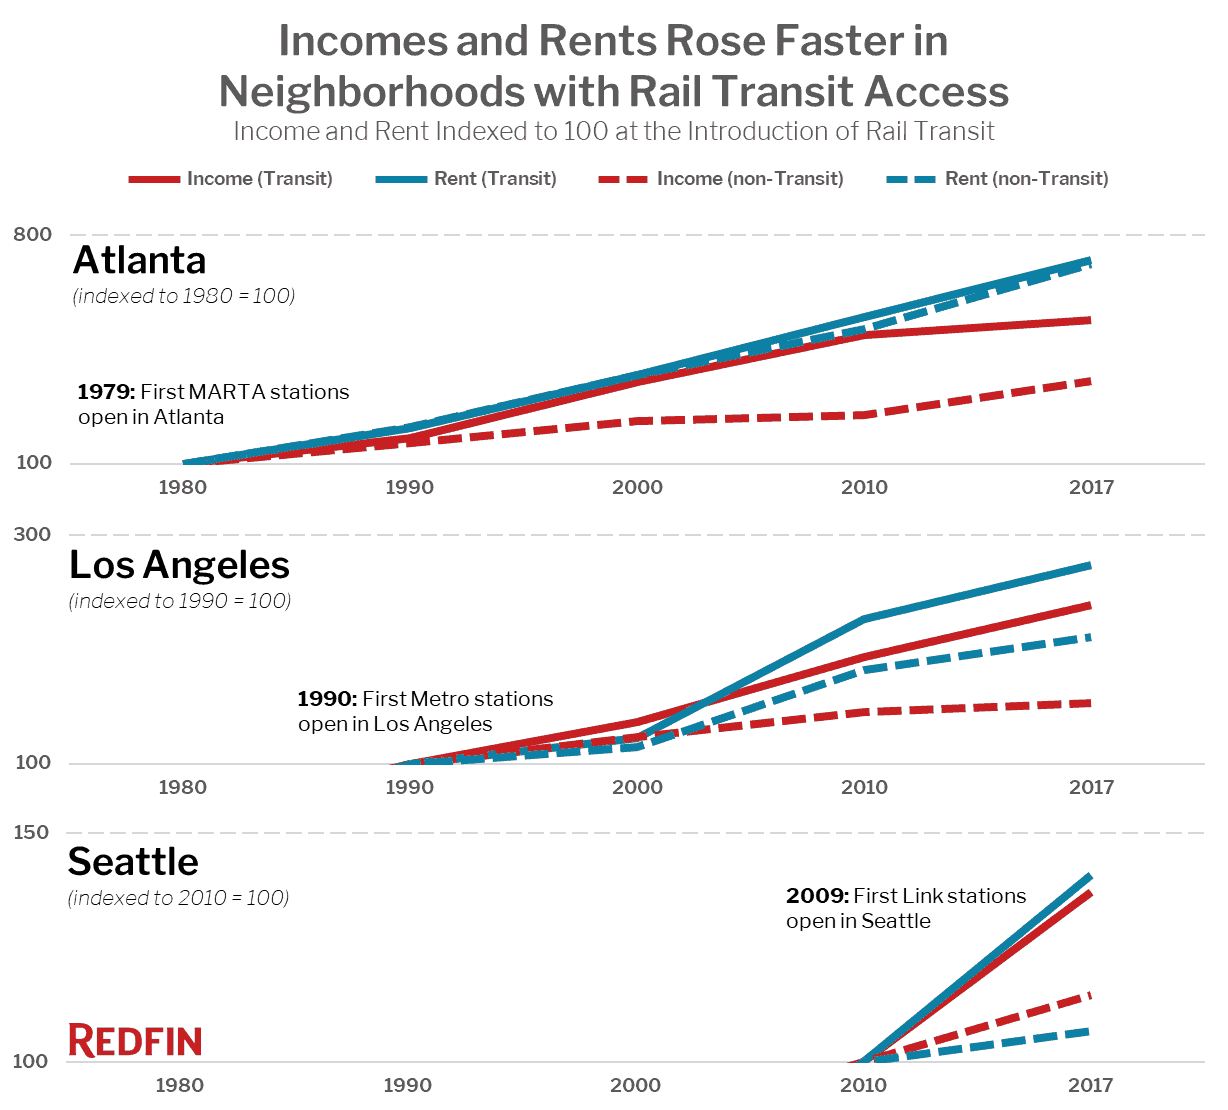 Incomes and Rents Rose Faster in Neighborhoods with Rail Transit Access